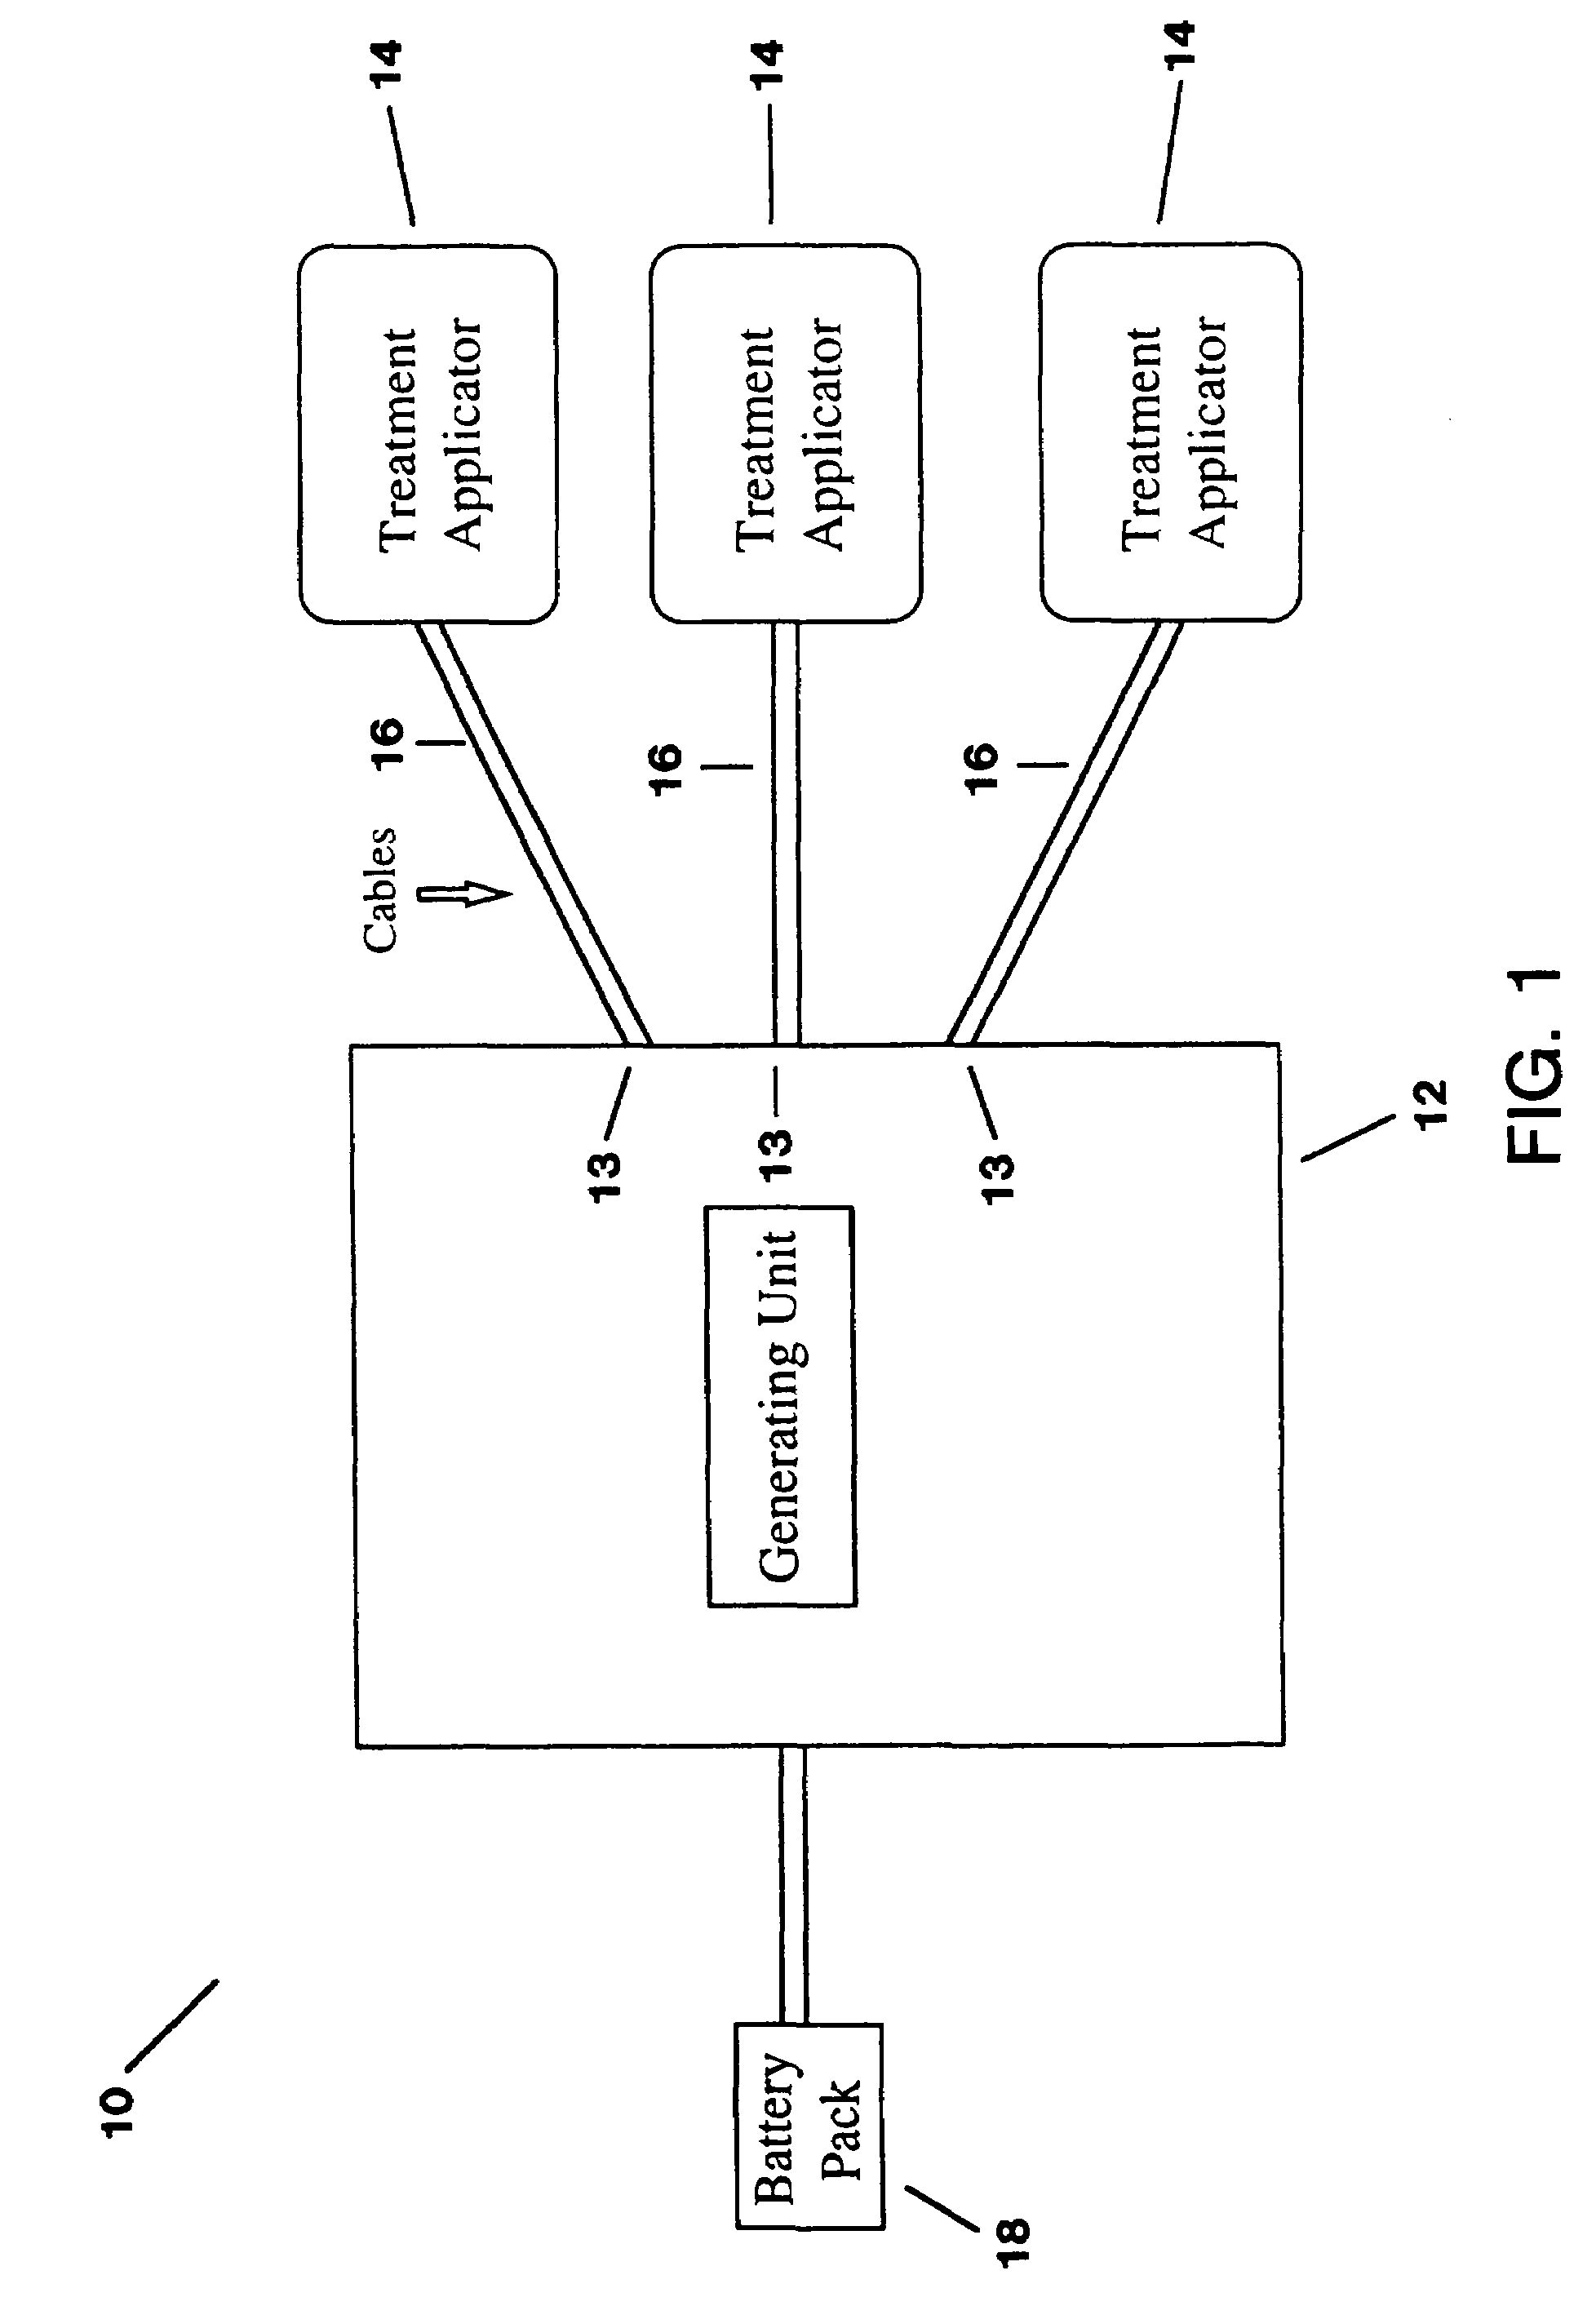 Pulsed electromagnetic energy treatment apparatus and method